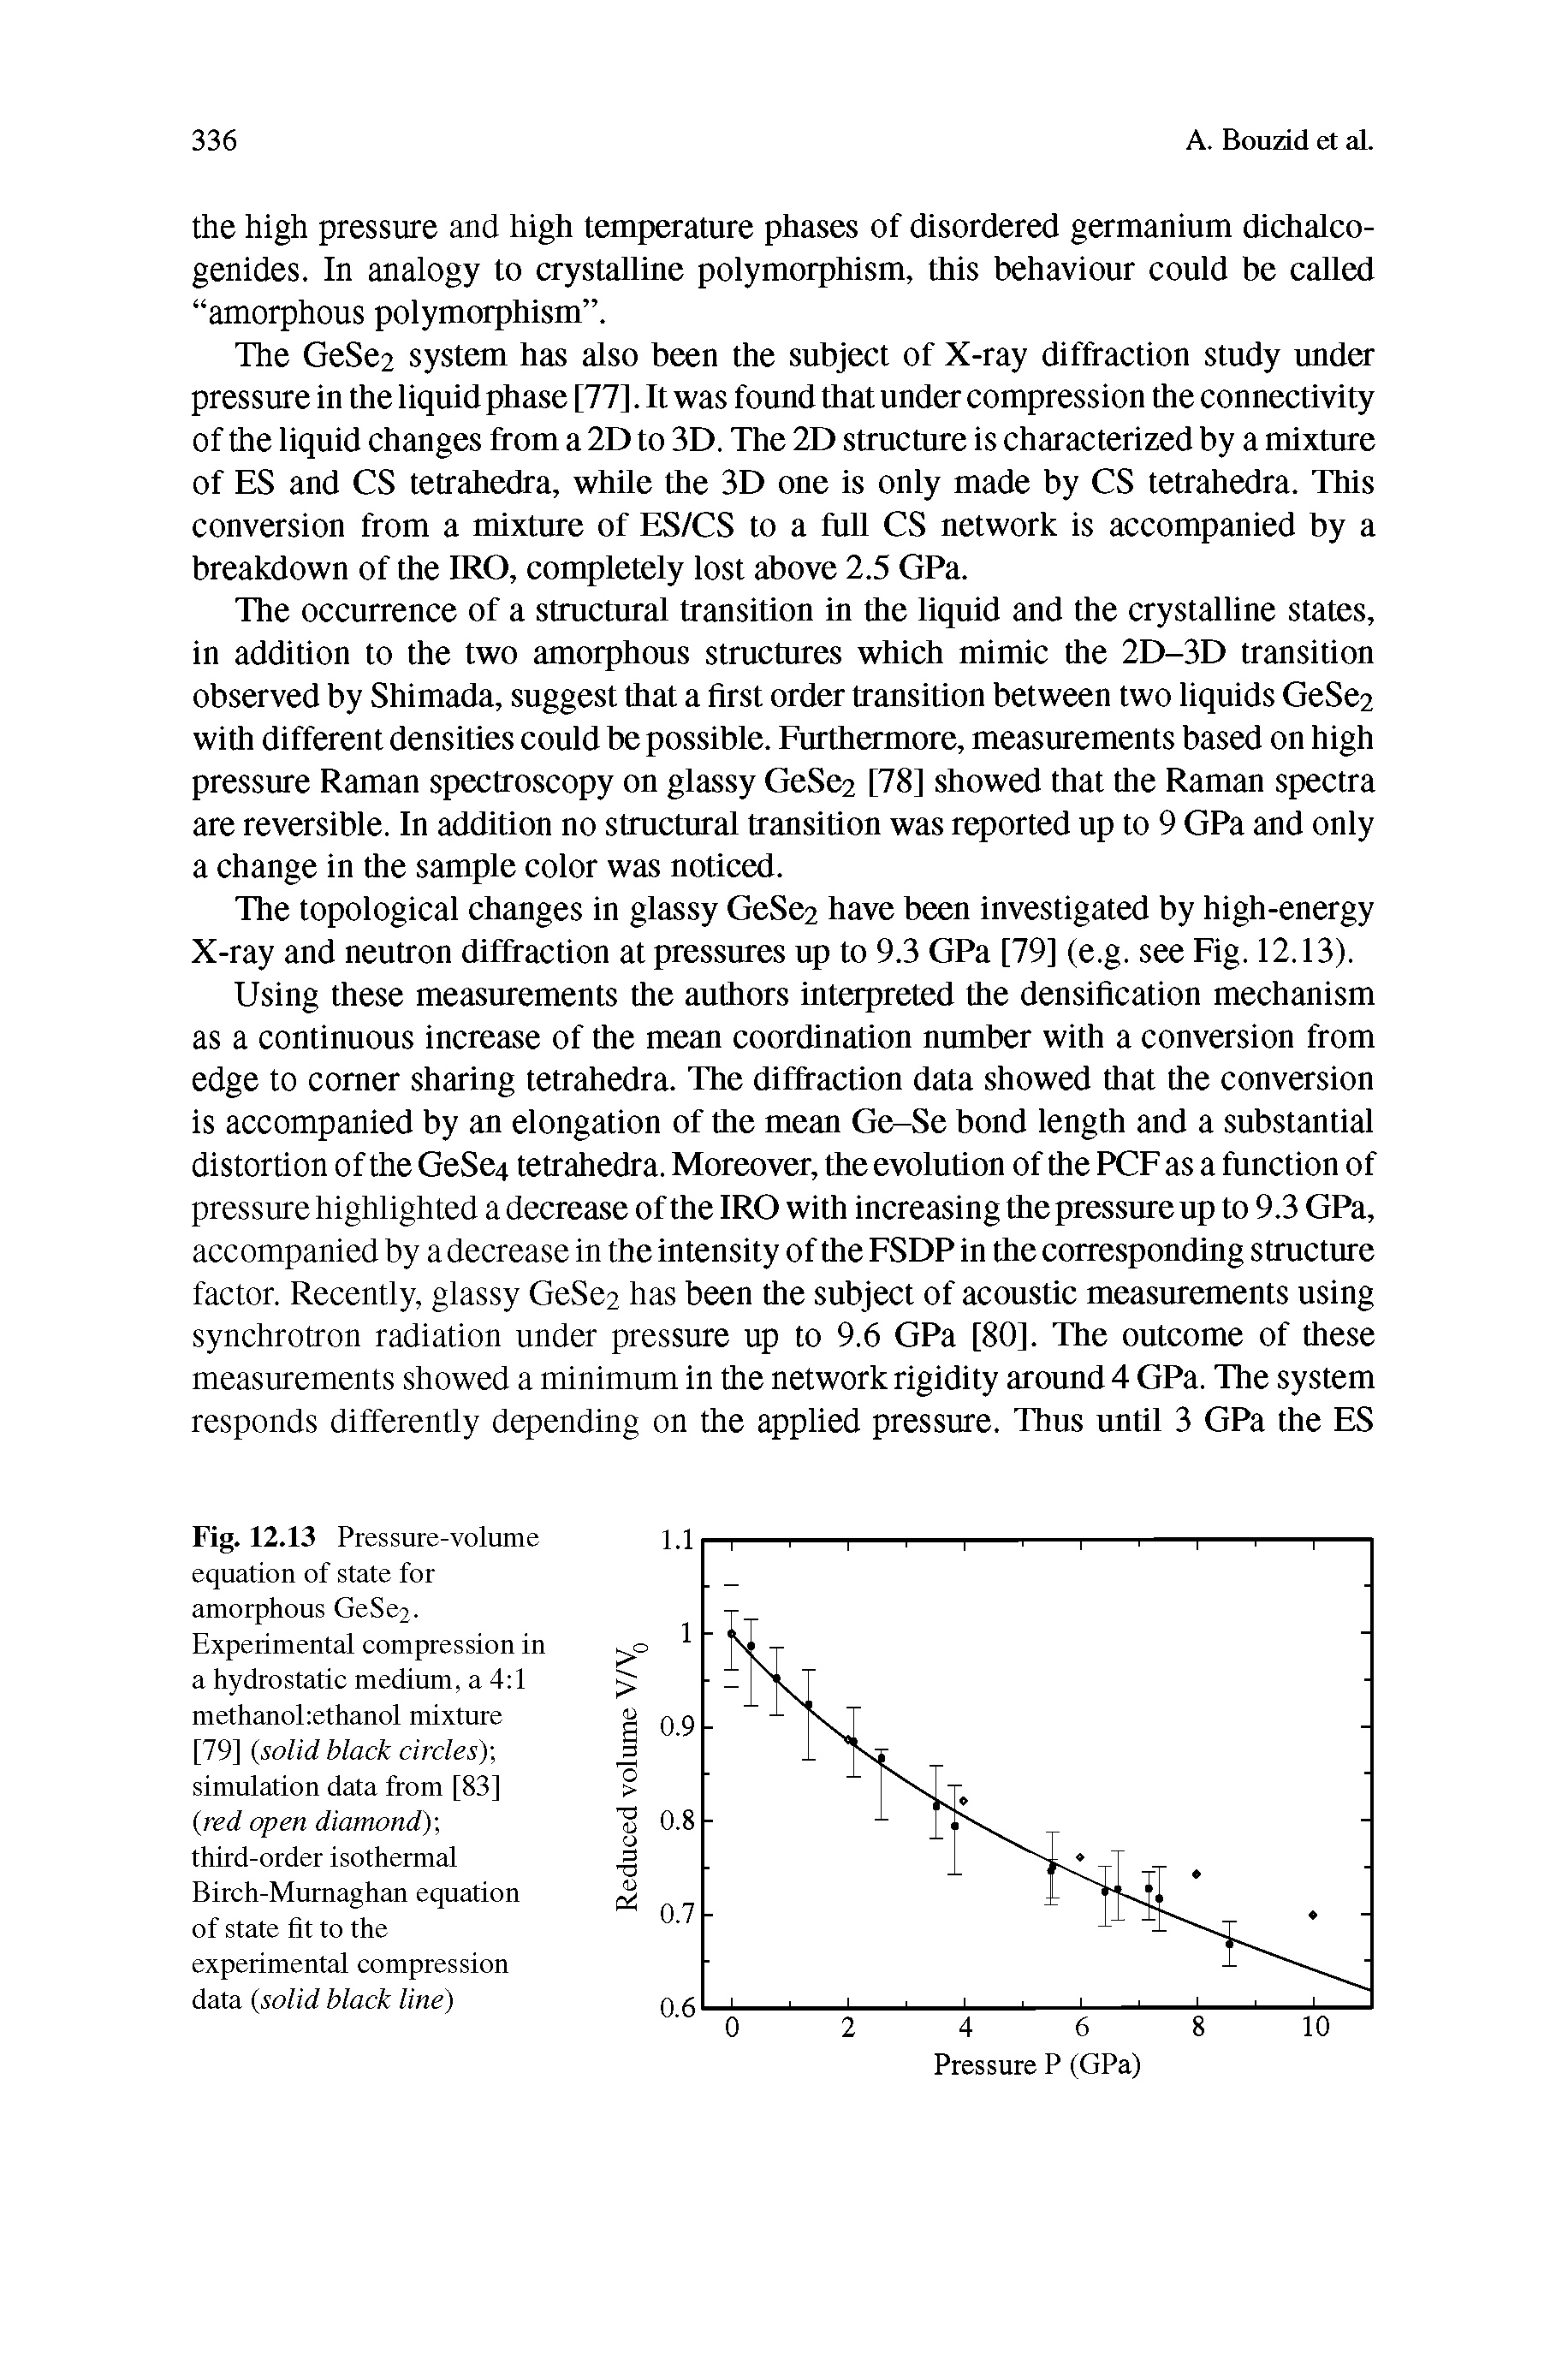 Fig. 12.13 Pressure-volume equation of state for amorphous GeSe2. Experimental compression in a hydrostatic medium, a 4 1 methanoEethanol mixture [79] solid black circles)-, simulation data from [83] red open diamond)-, third-order isothermal Birch-Murnaghan equation of state fit to the experimental compression data solid black line)...